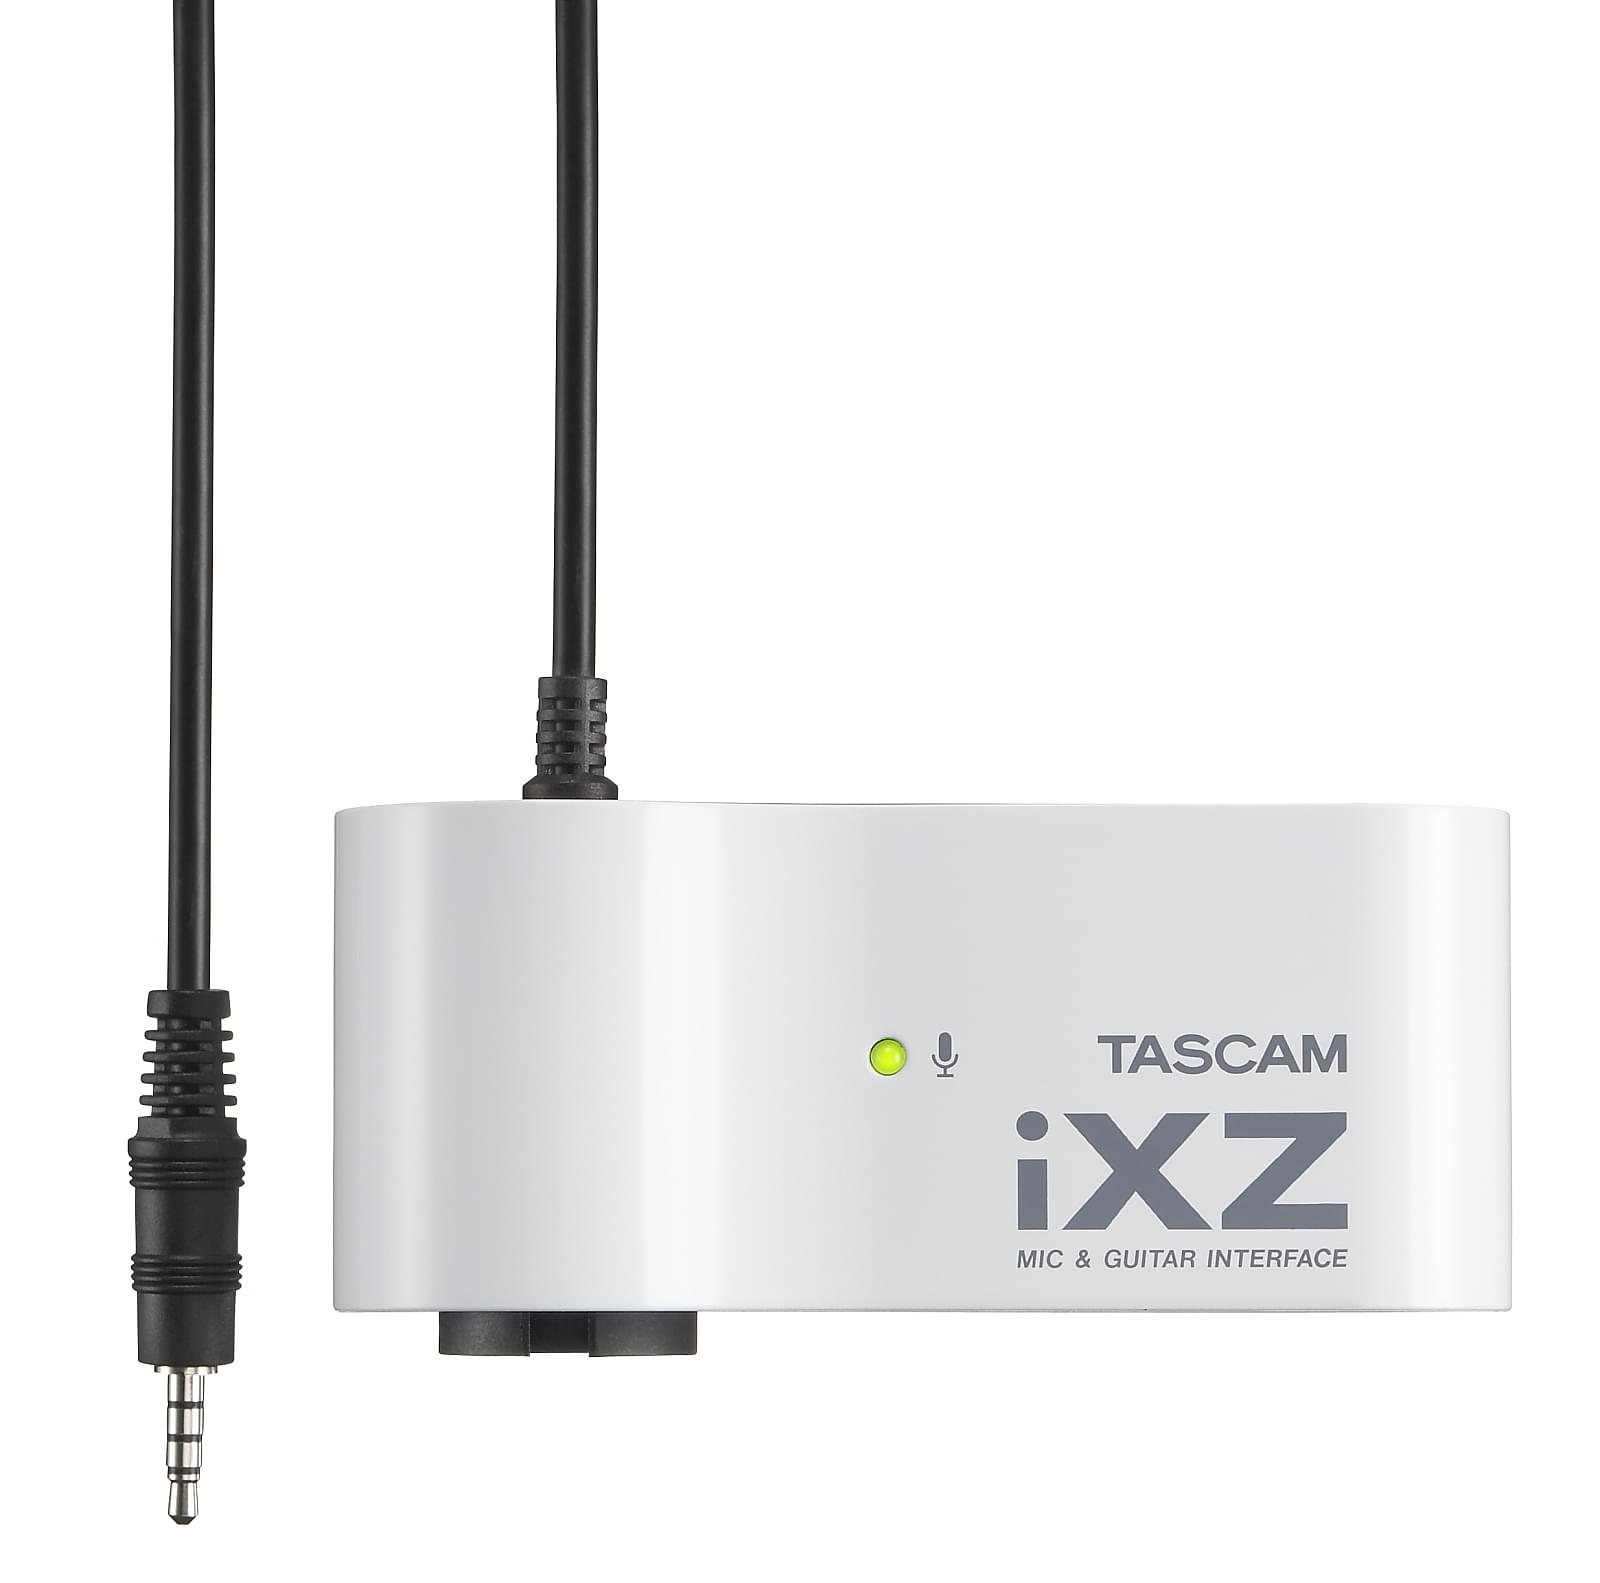 Top view | Tascam iXZ